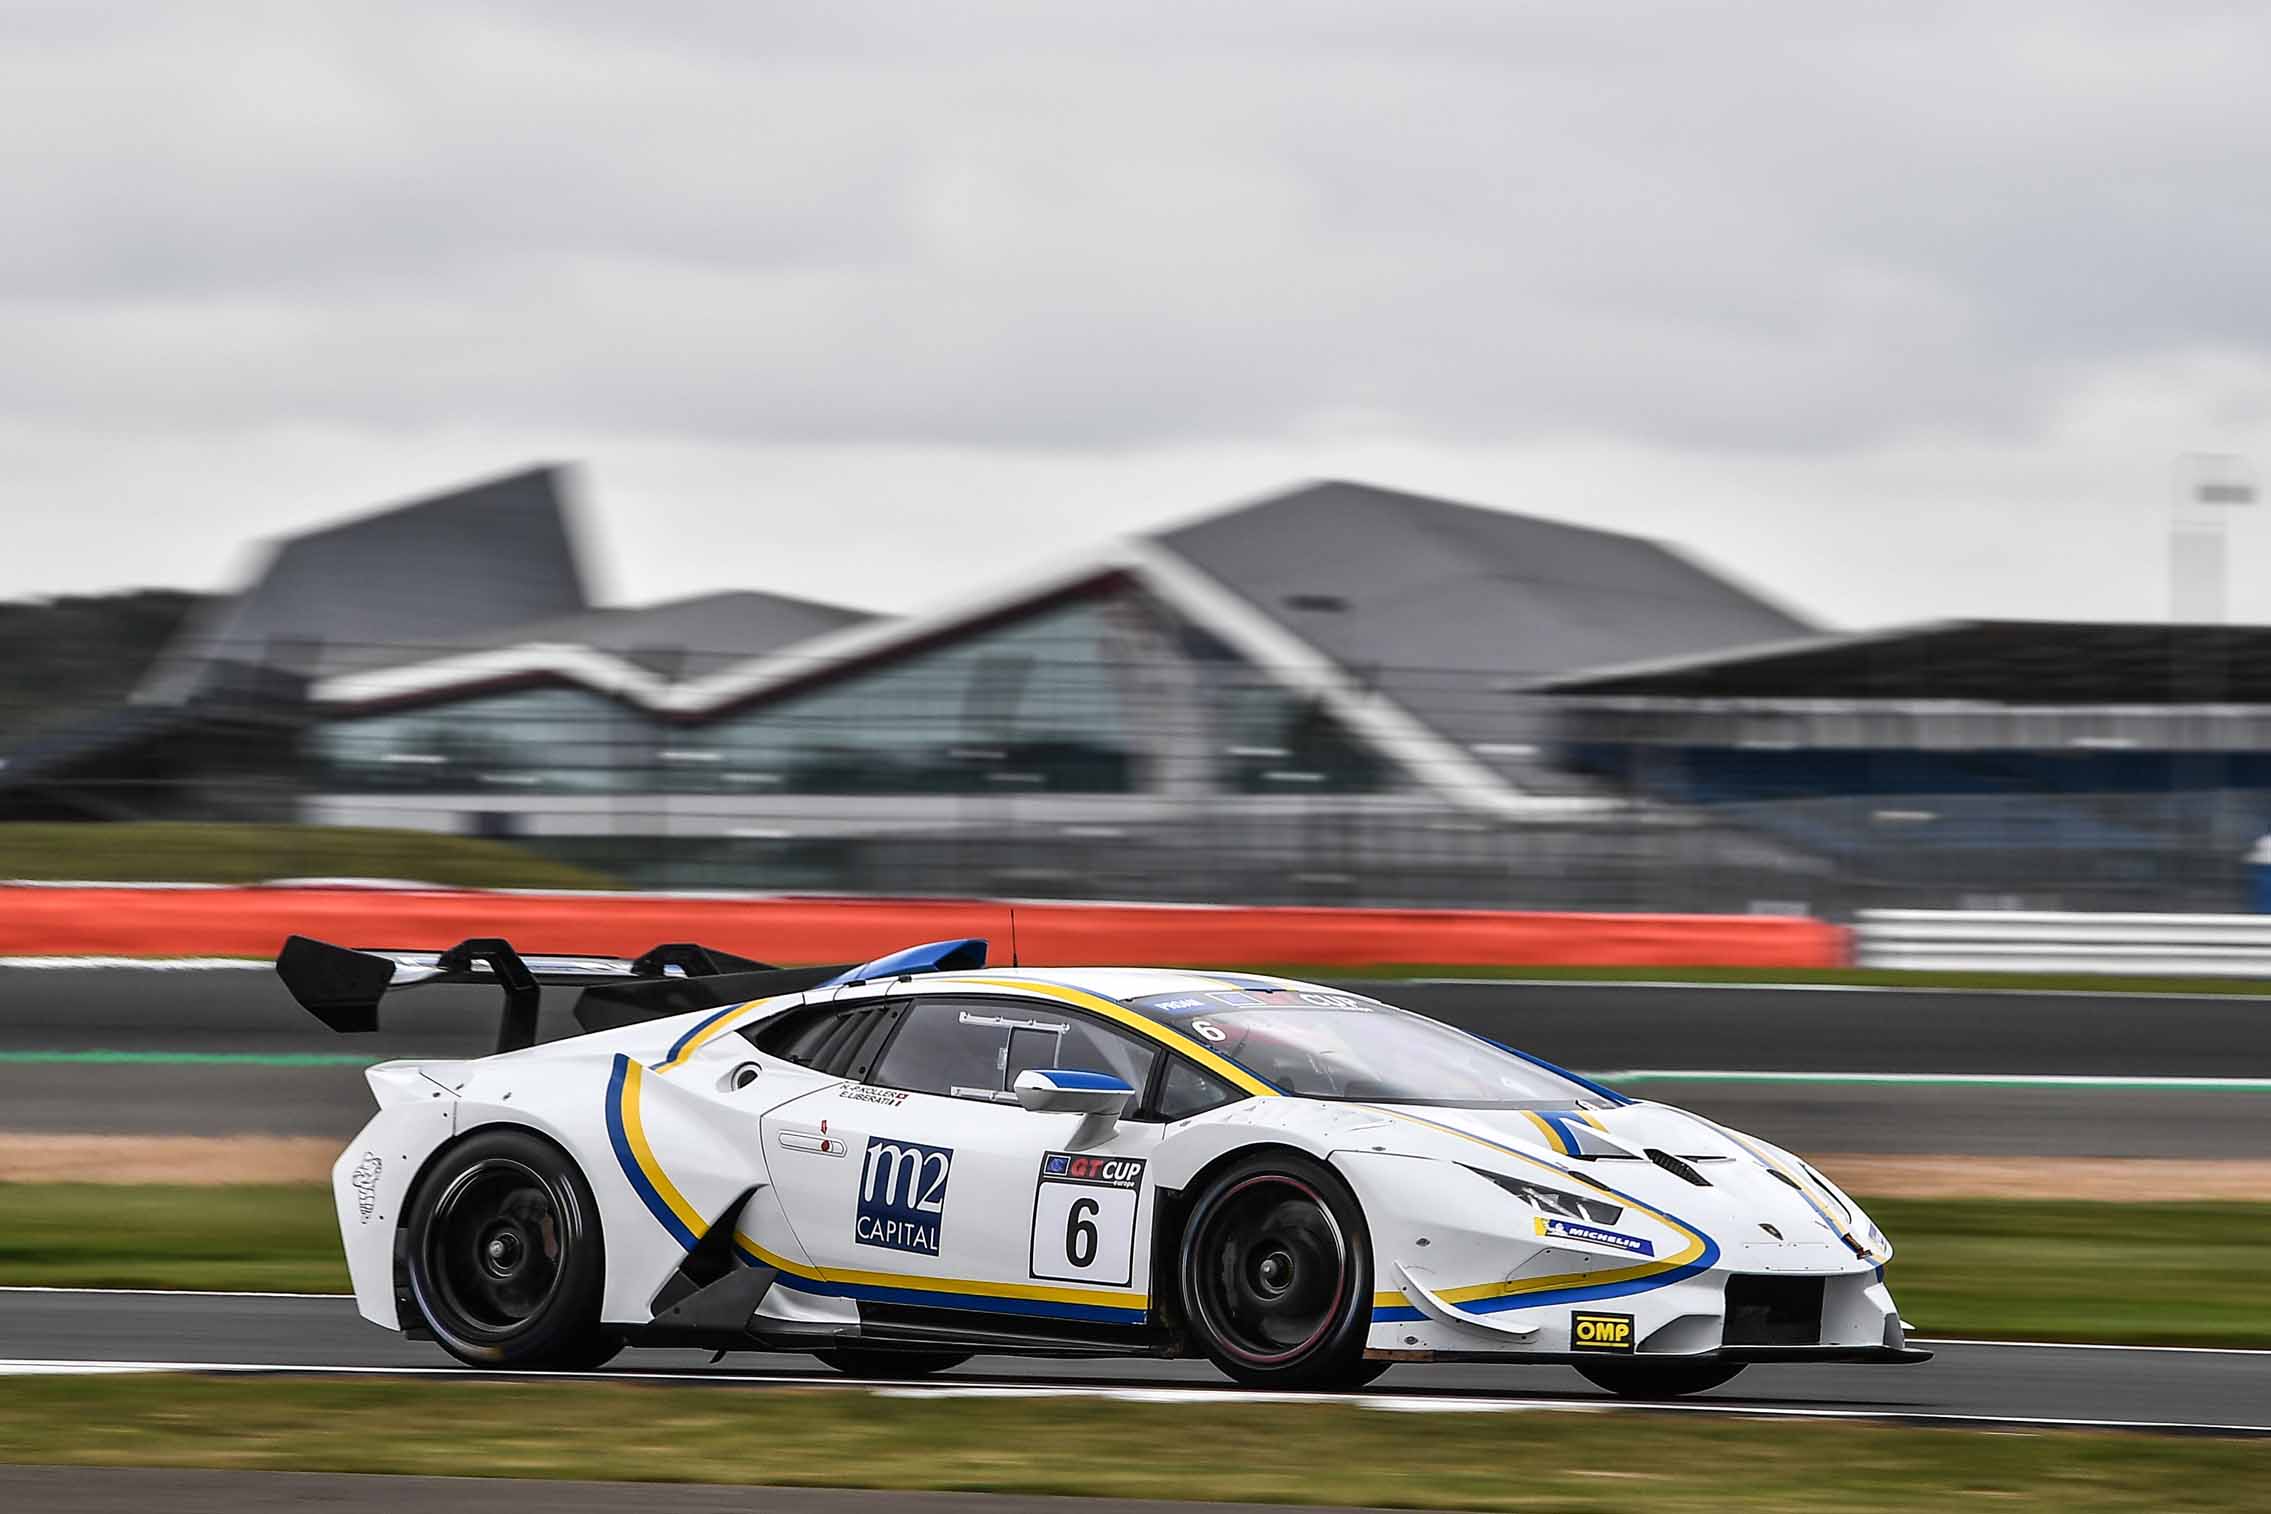 SILVERSTONE DOUBLE FOR KOLLER AND LIBERATI
